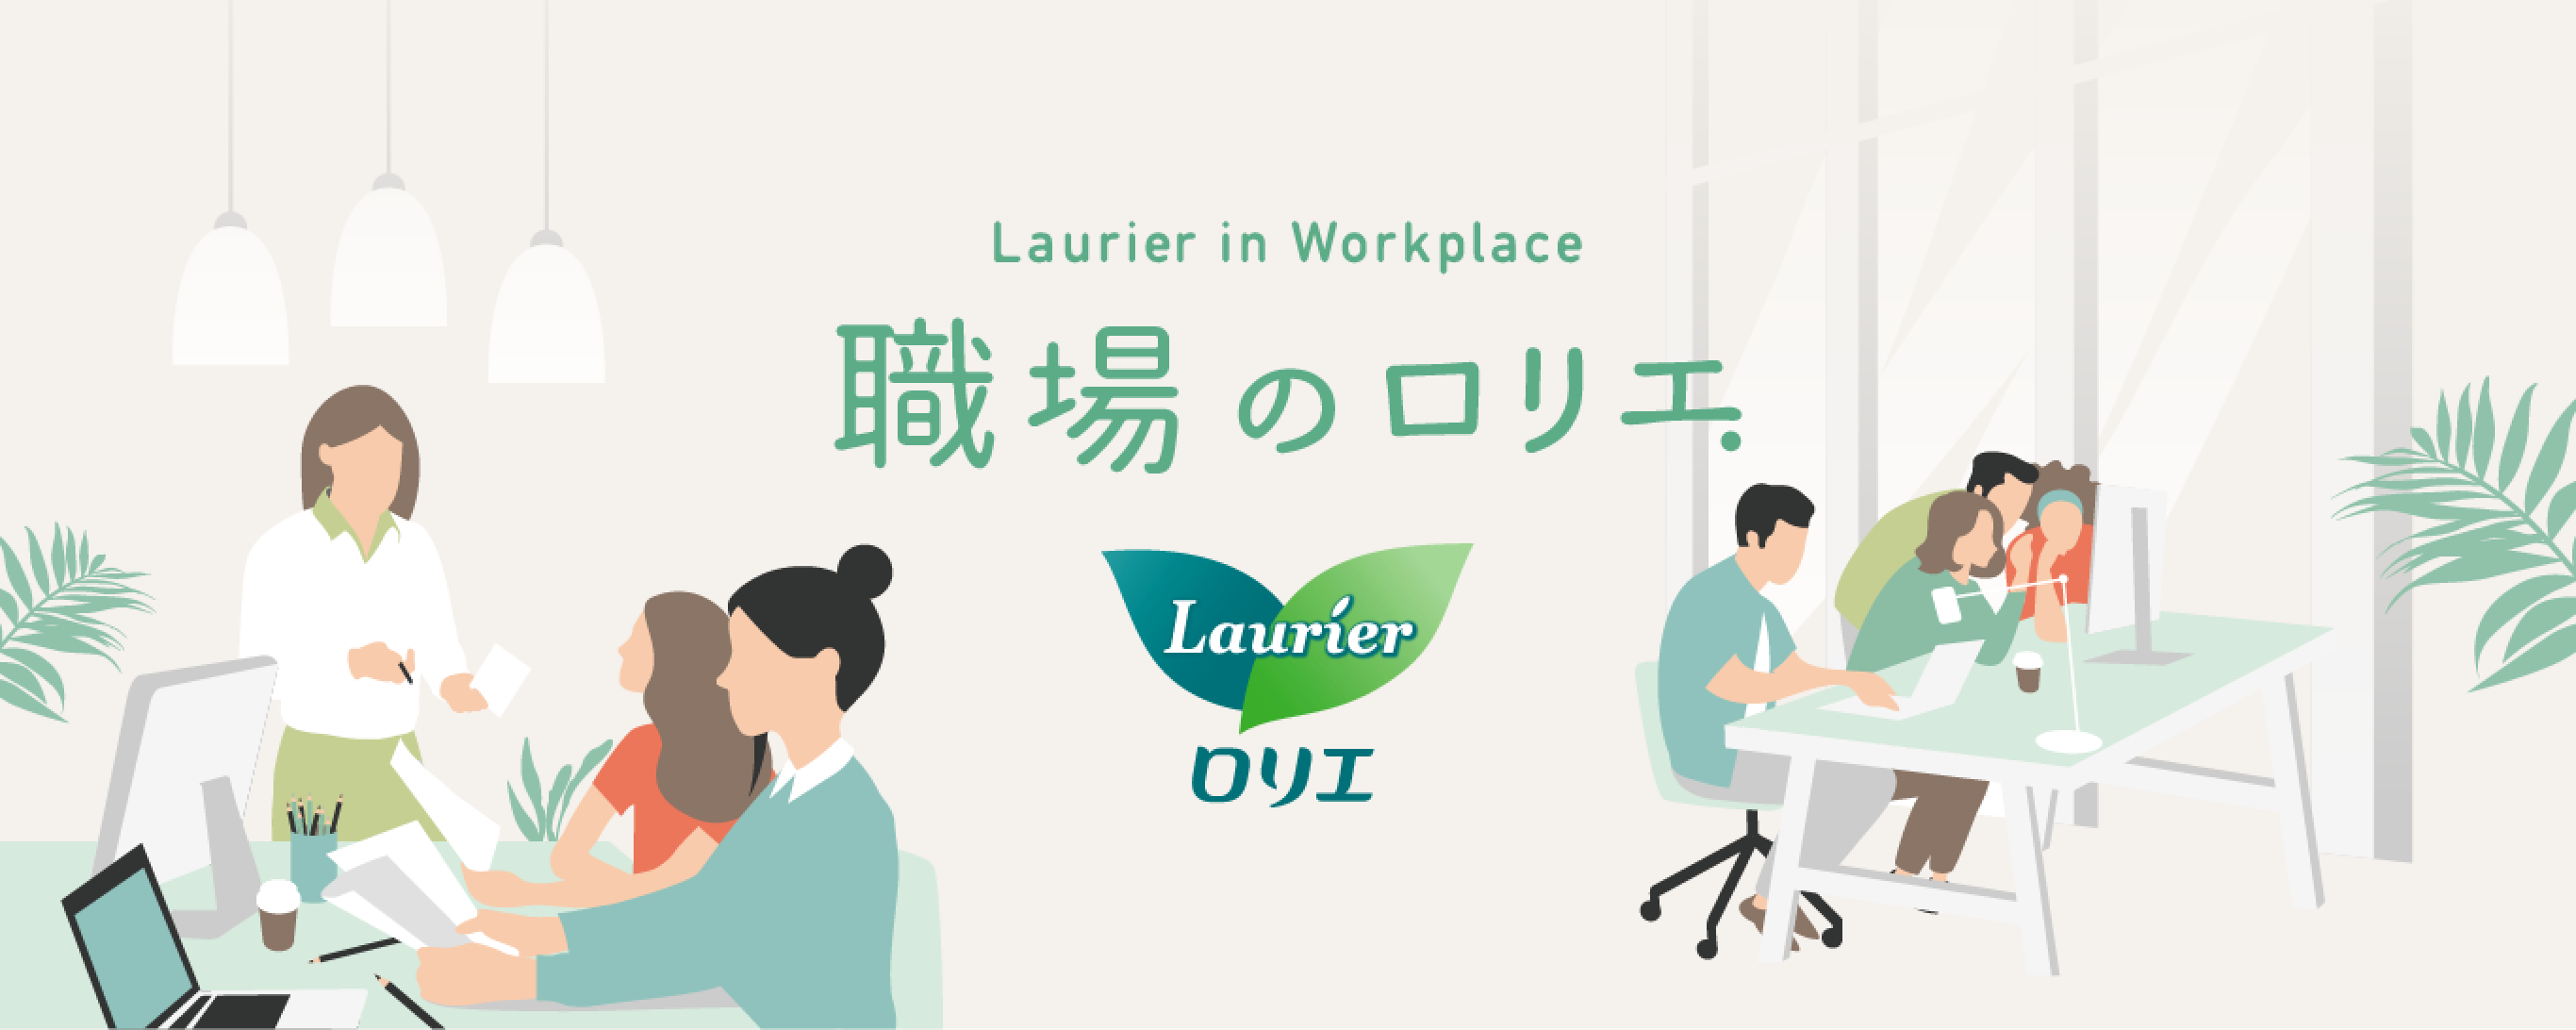 Laurier in WorkPlace 職場のロリエ